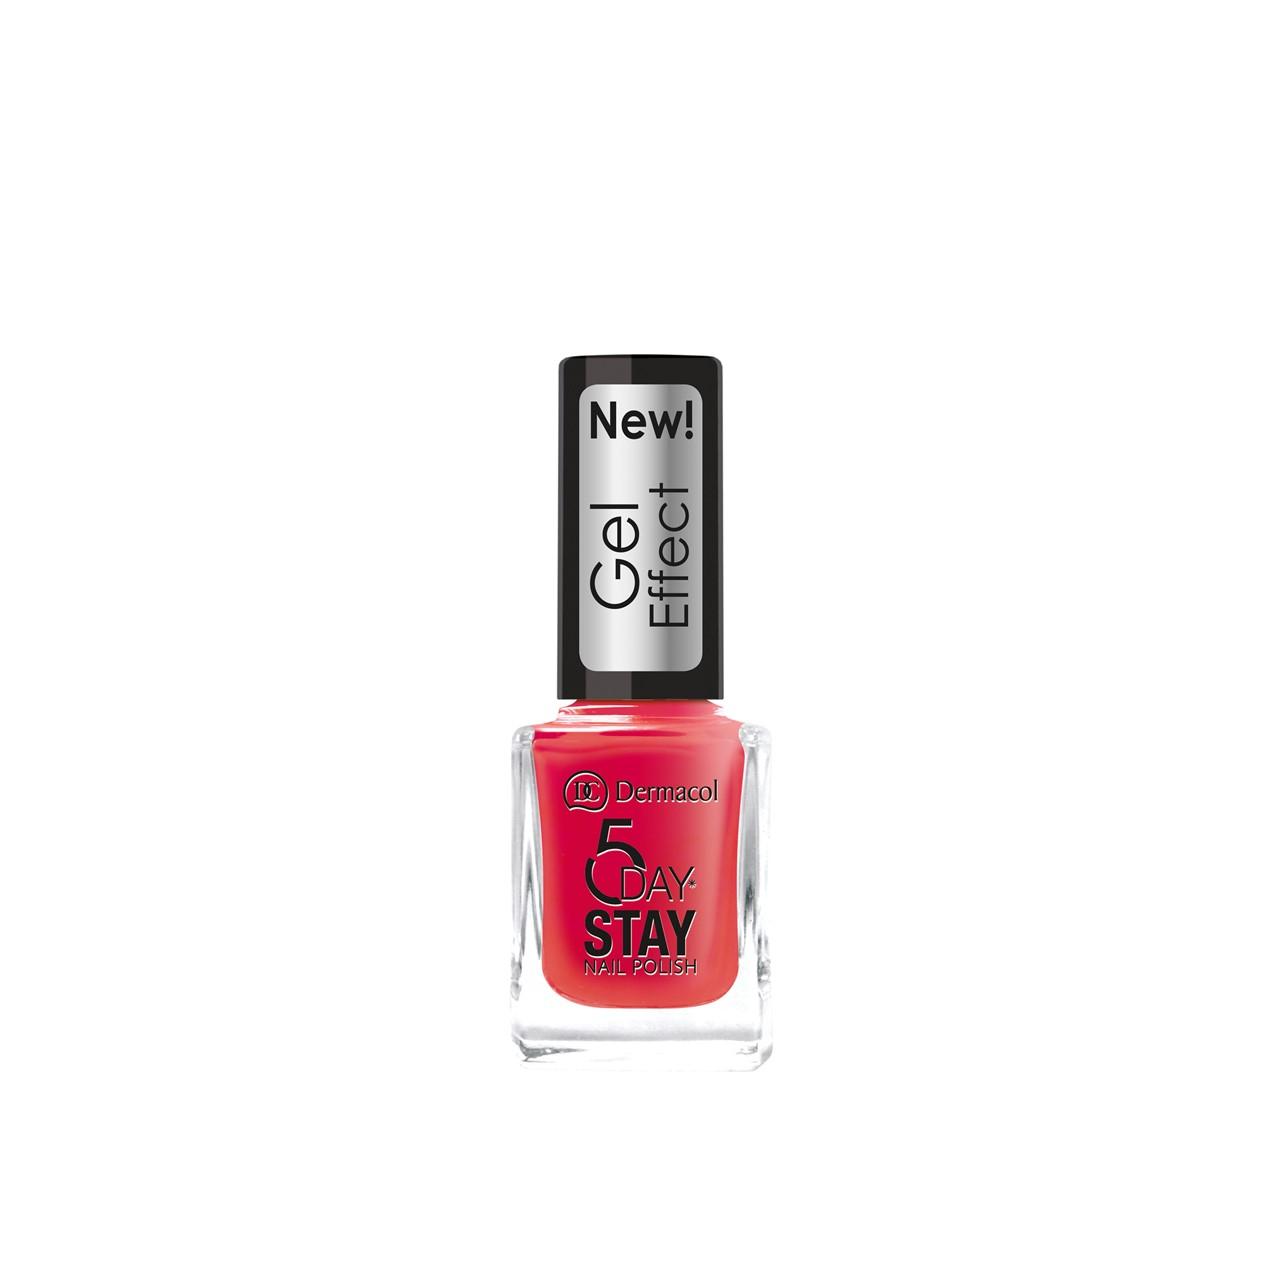 Dermacol 5 Day Stay Nail Polish 28 Moulin Rouge 12ml